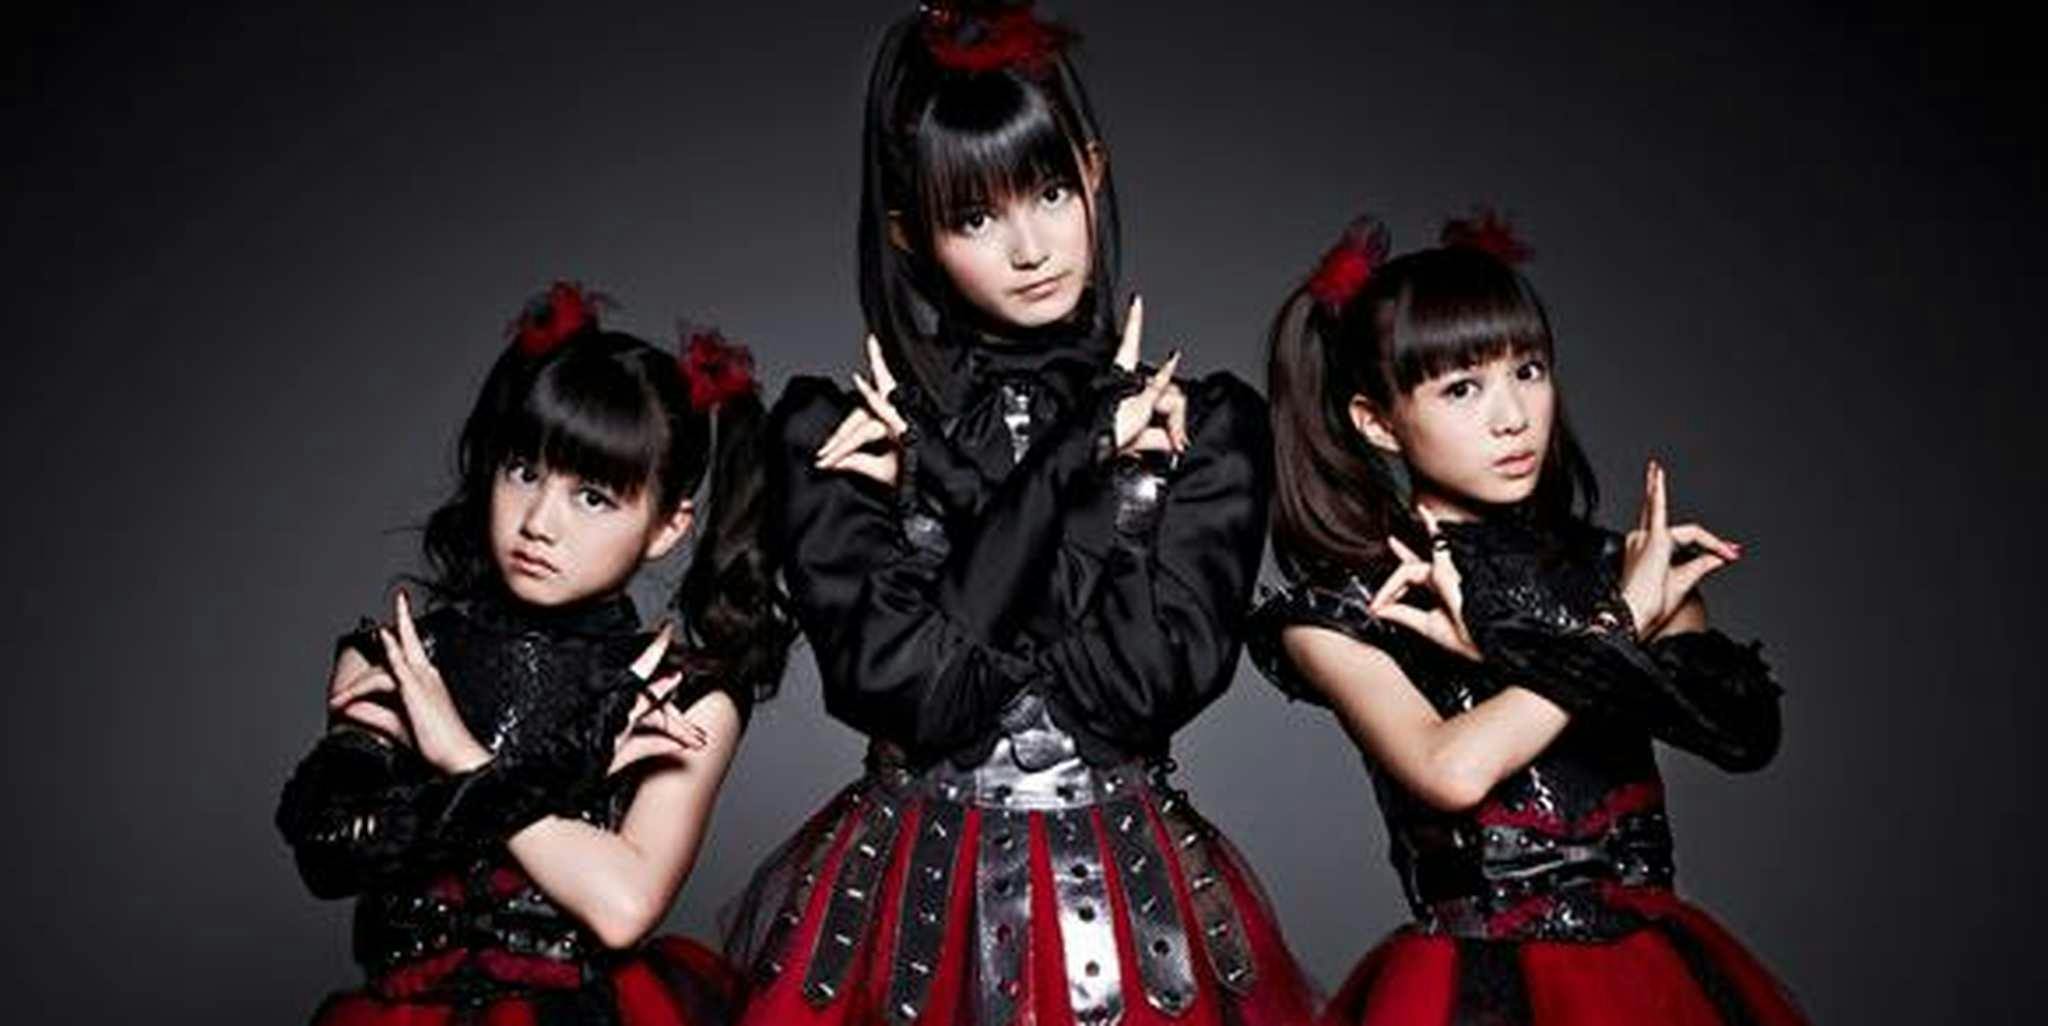 Japanese Teen Pop Meets Death Metal In An Explosion Of Awesome The Daily Dot